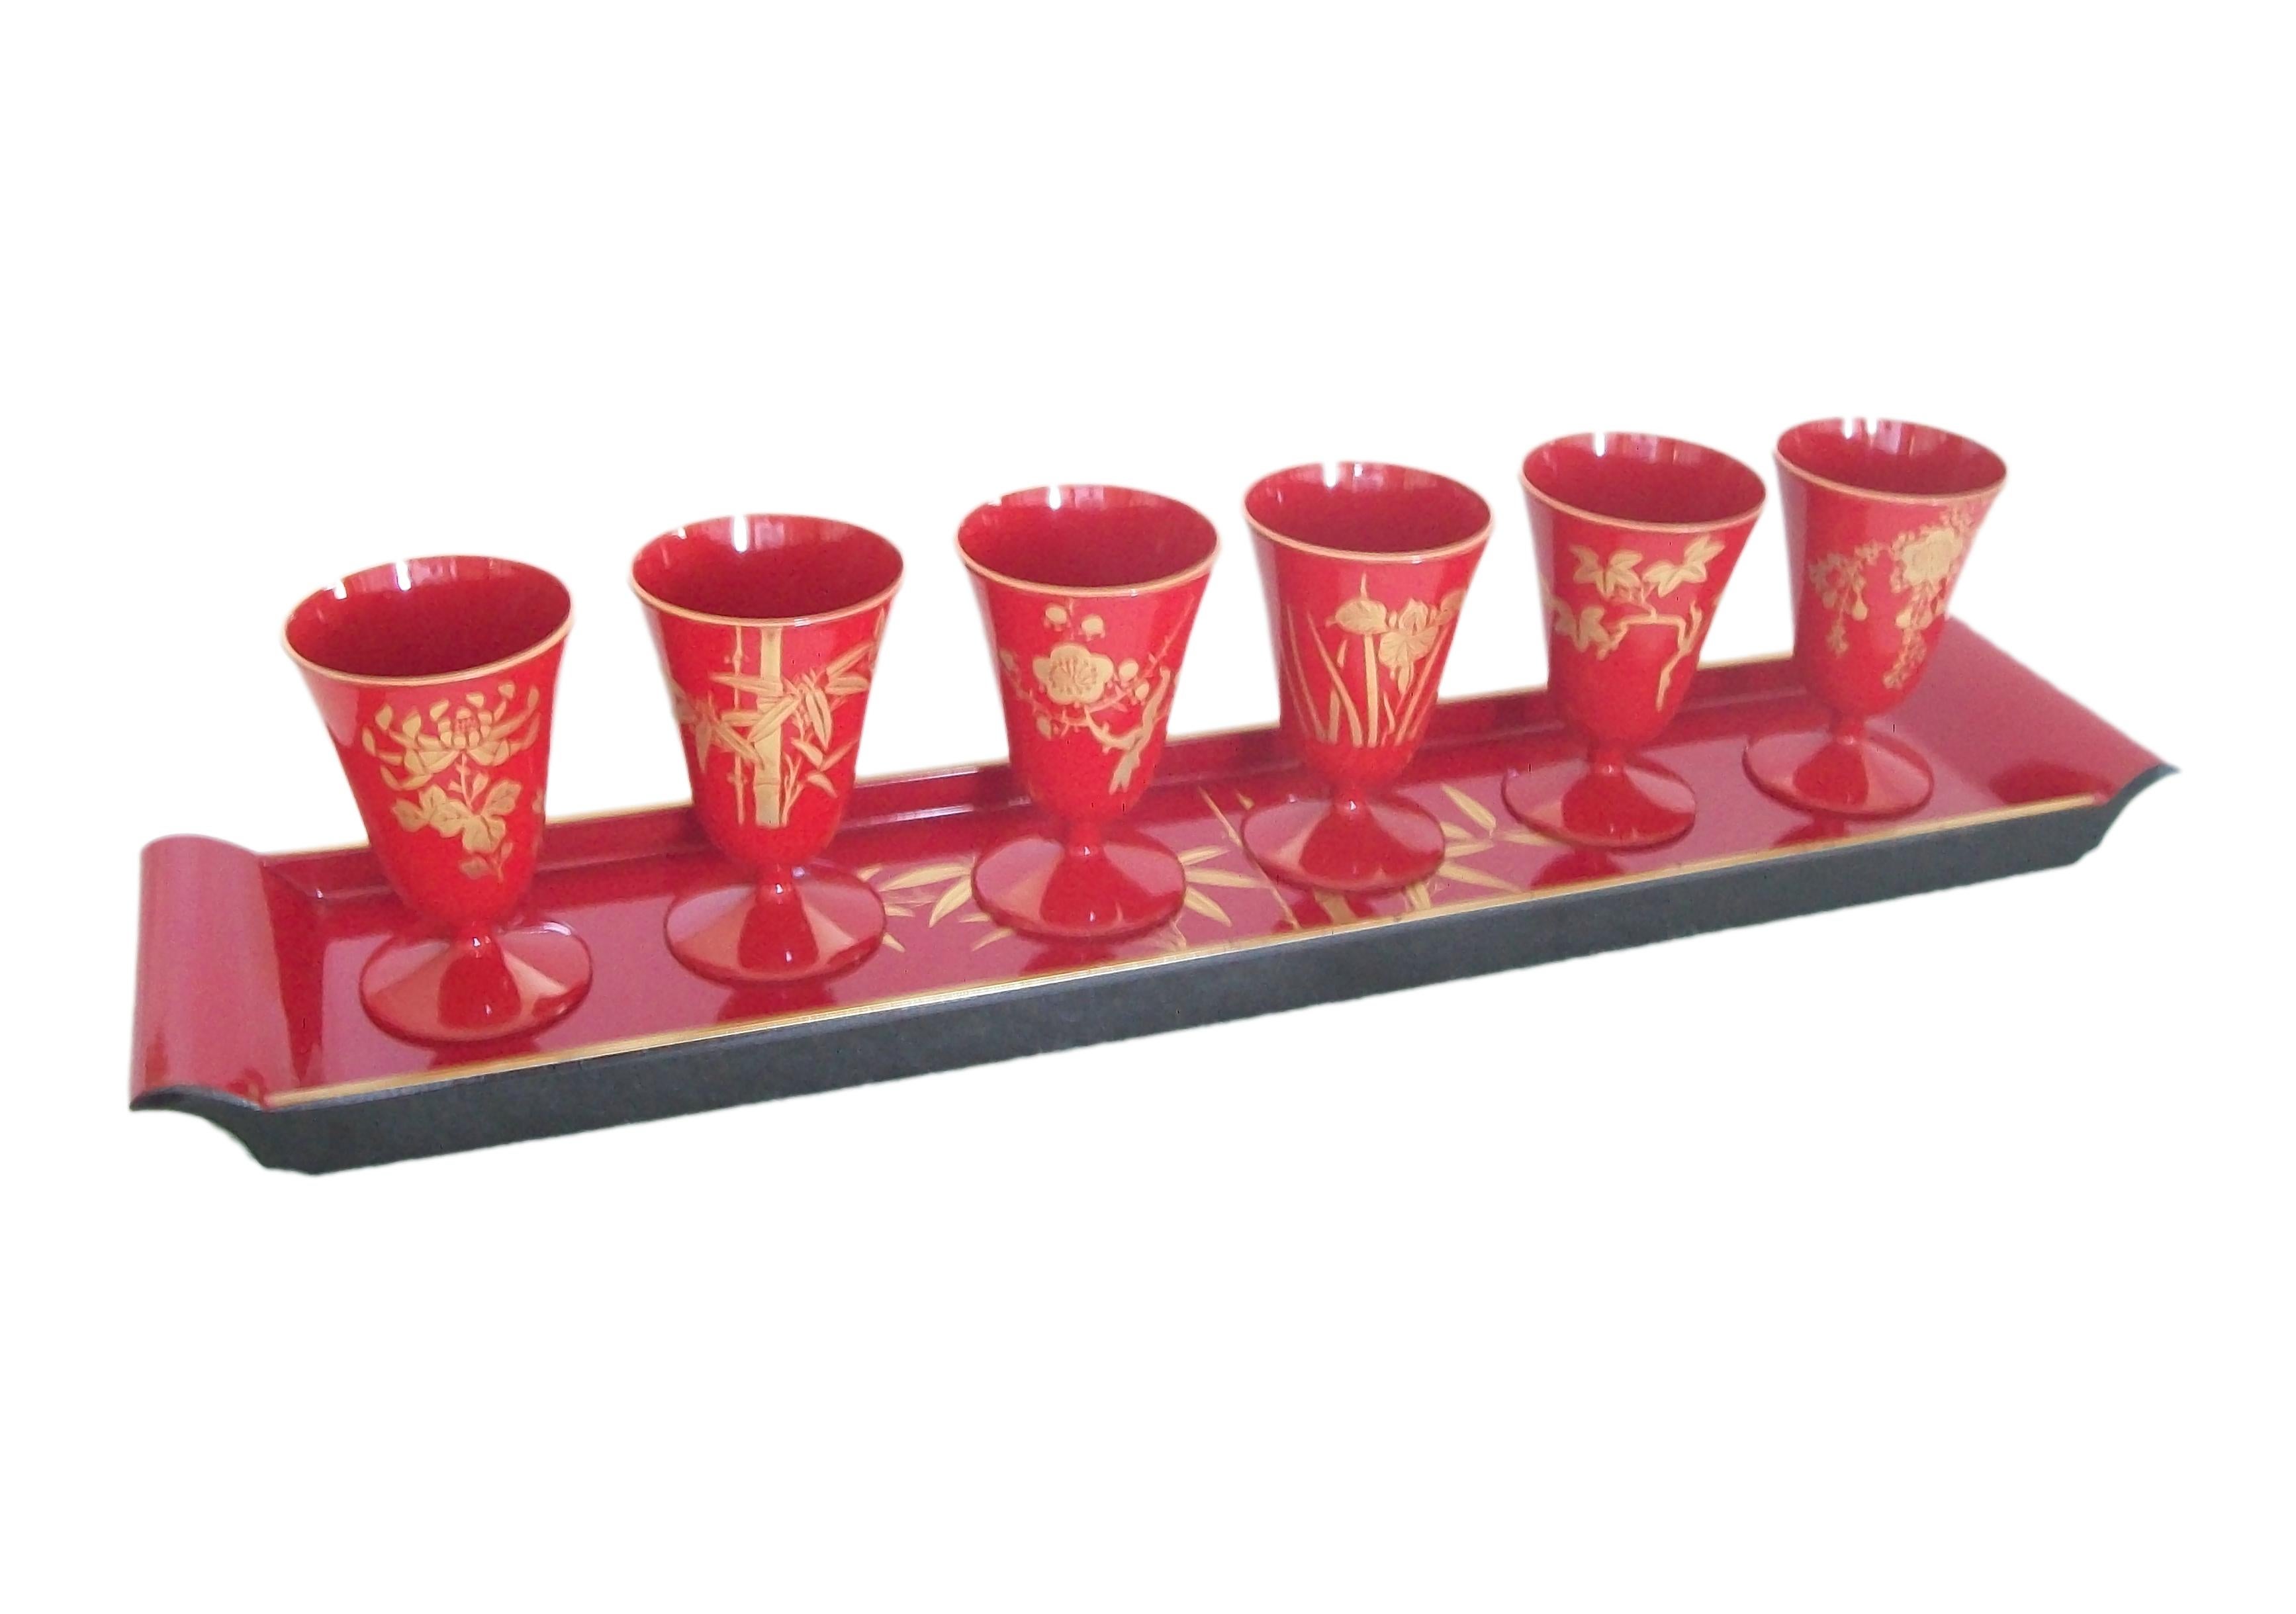 Anglo-Japanese Vintage Urushi Red & Gilt Lacquer Tray & Six Cups with Box - Japan - Mid 20th C. For Sale